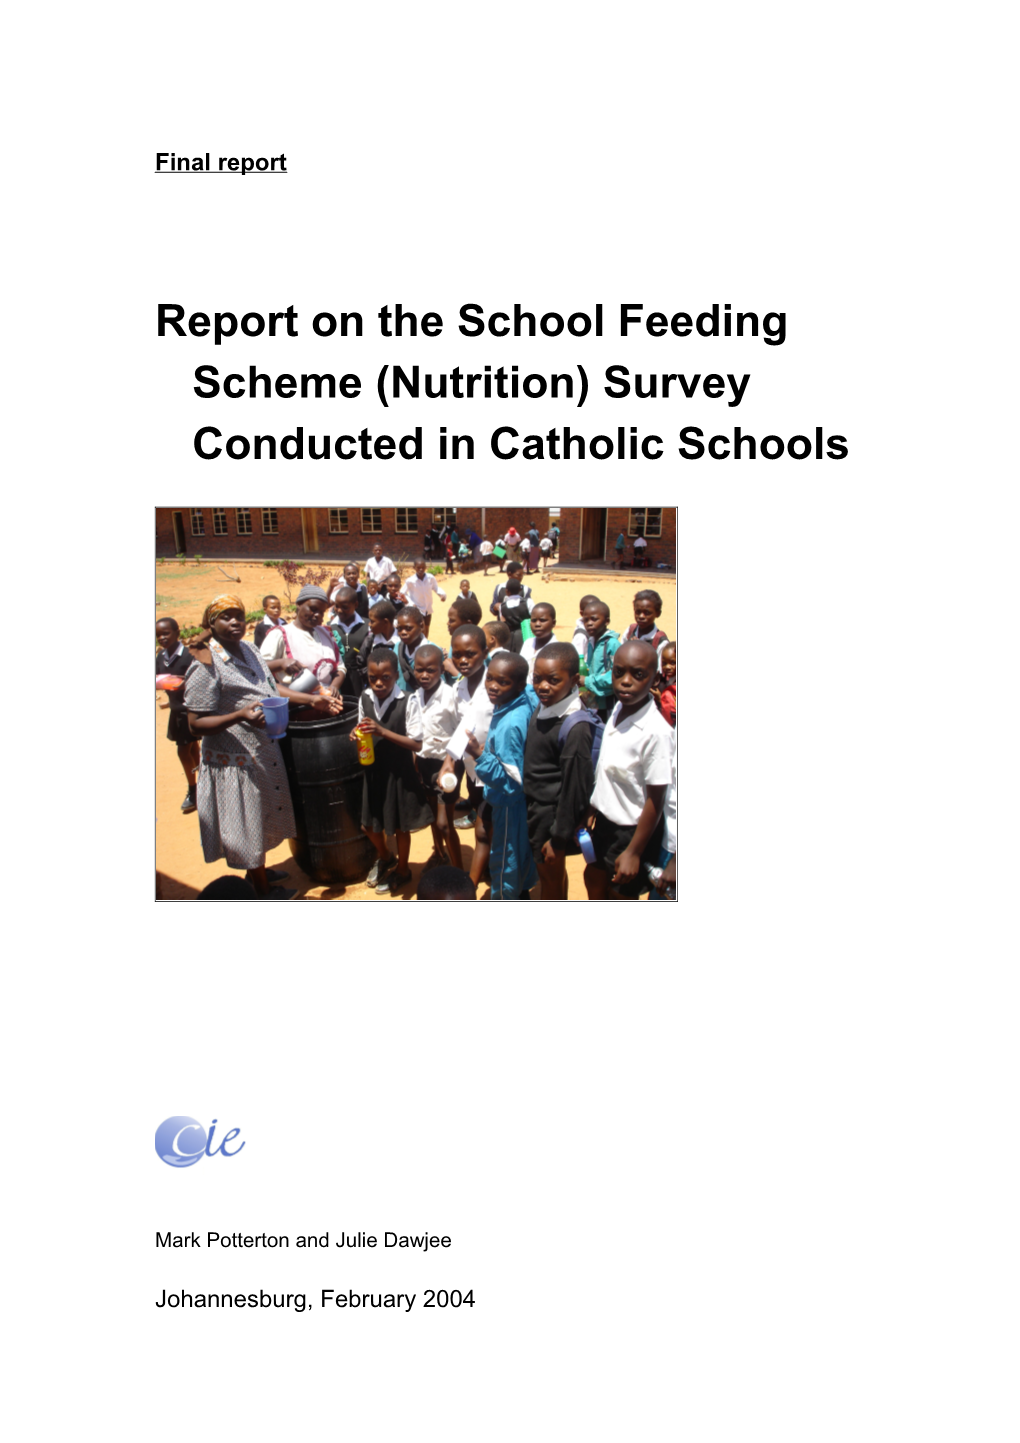 Report on the School Feeding Scheme (Nutrition) Survey Conducted in Catholic Schools